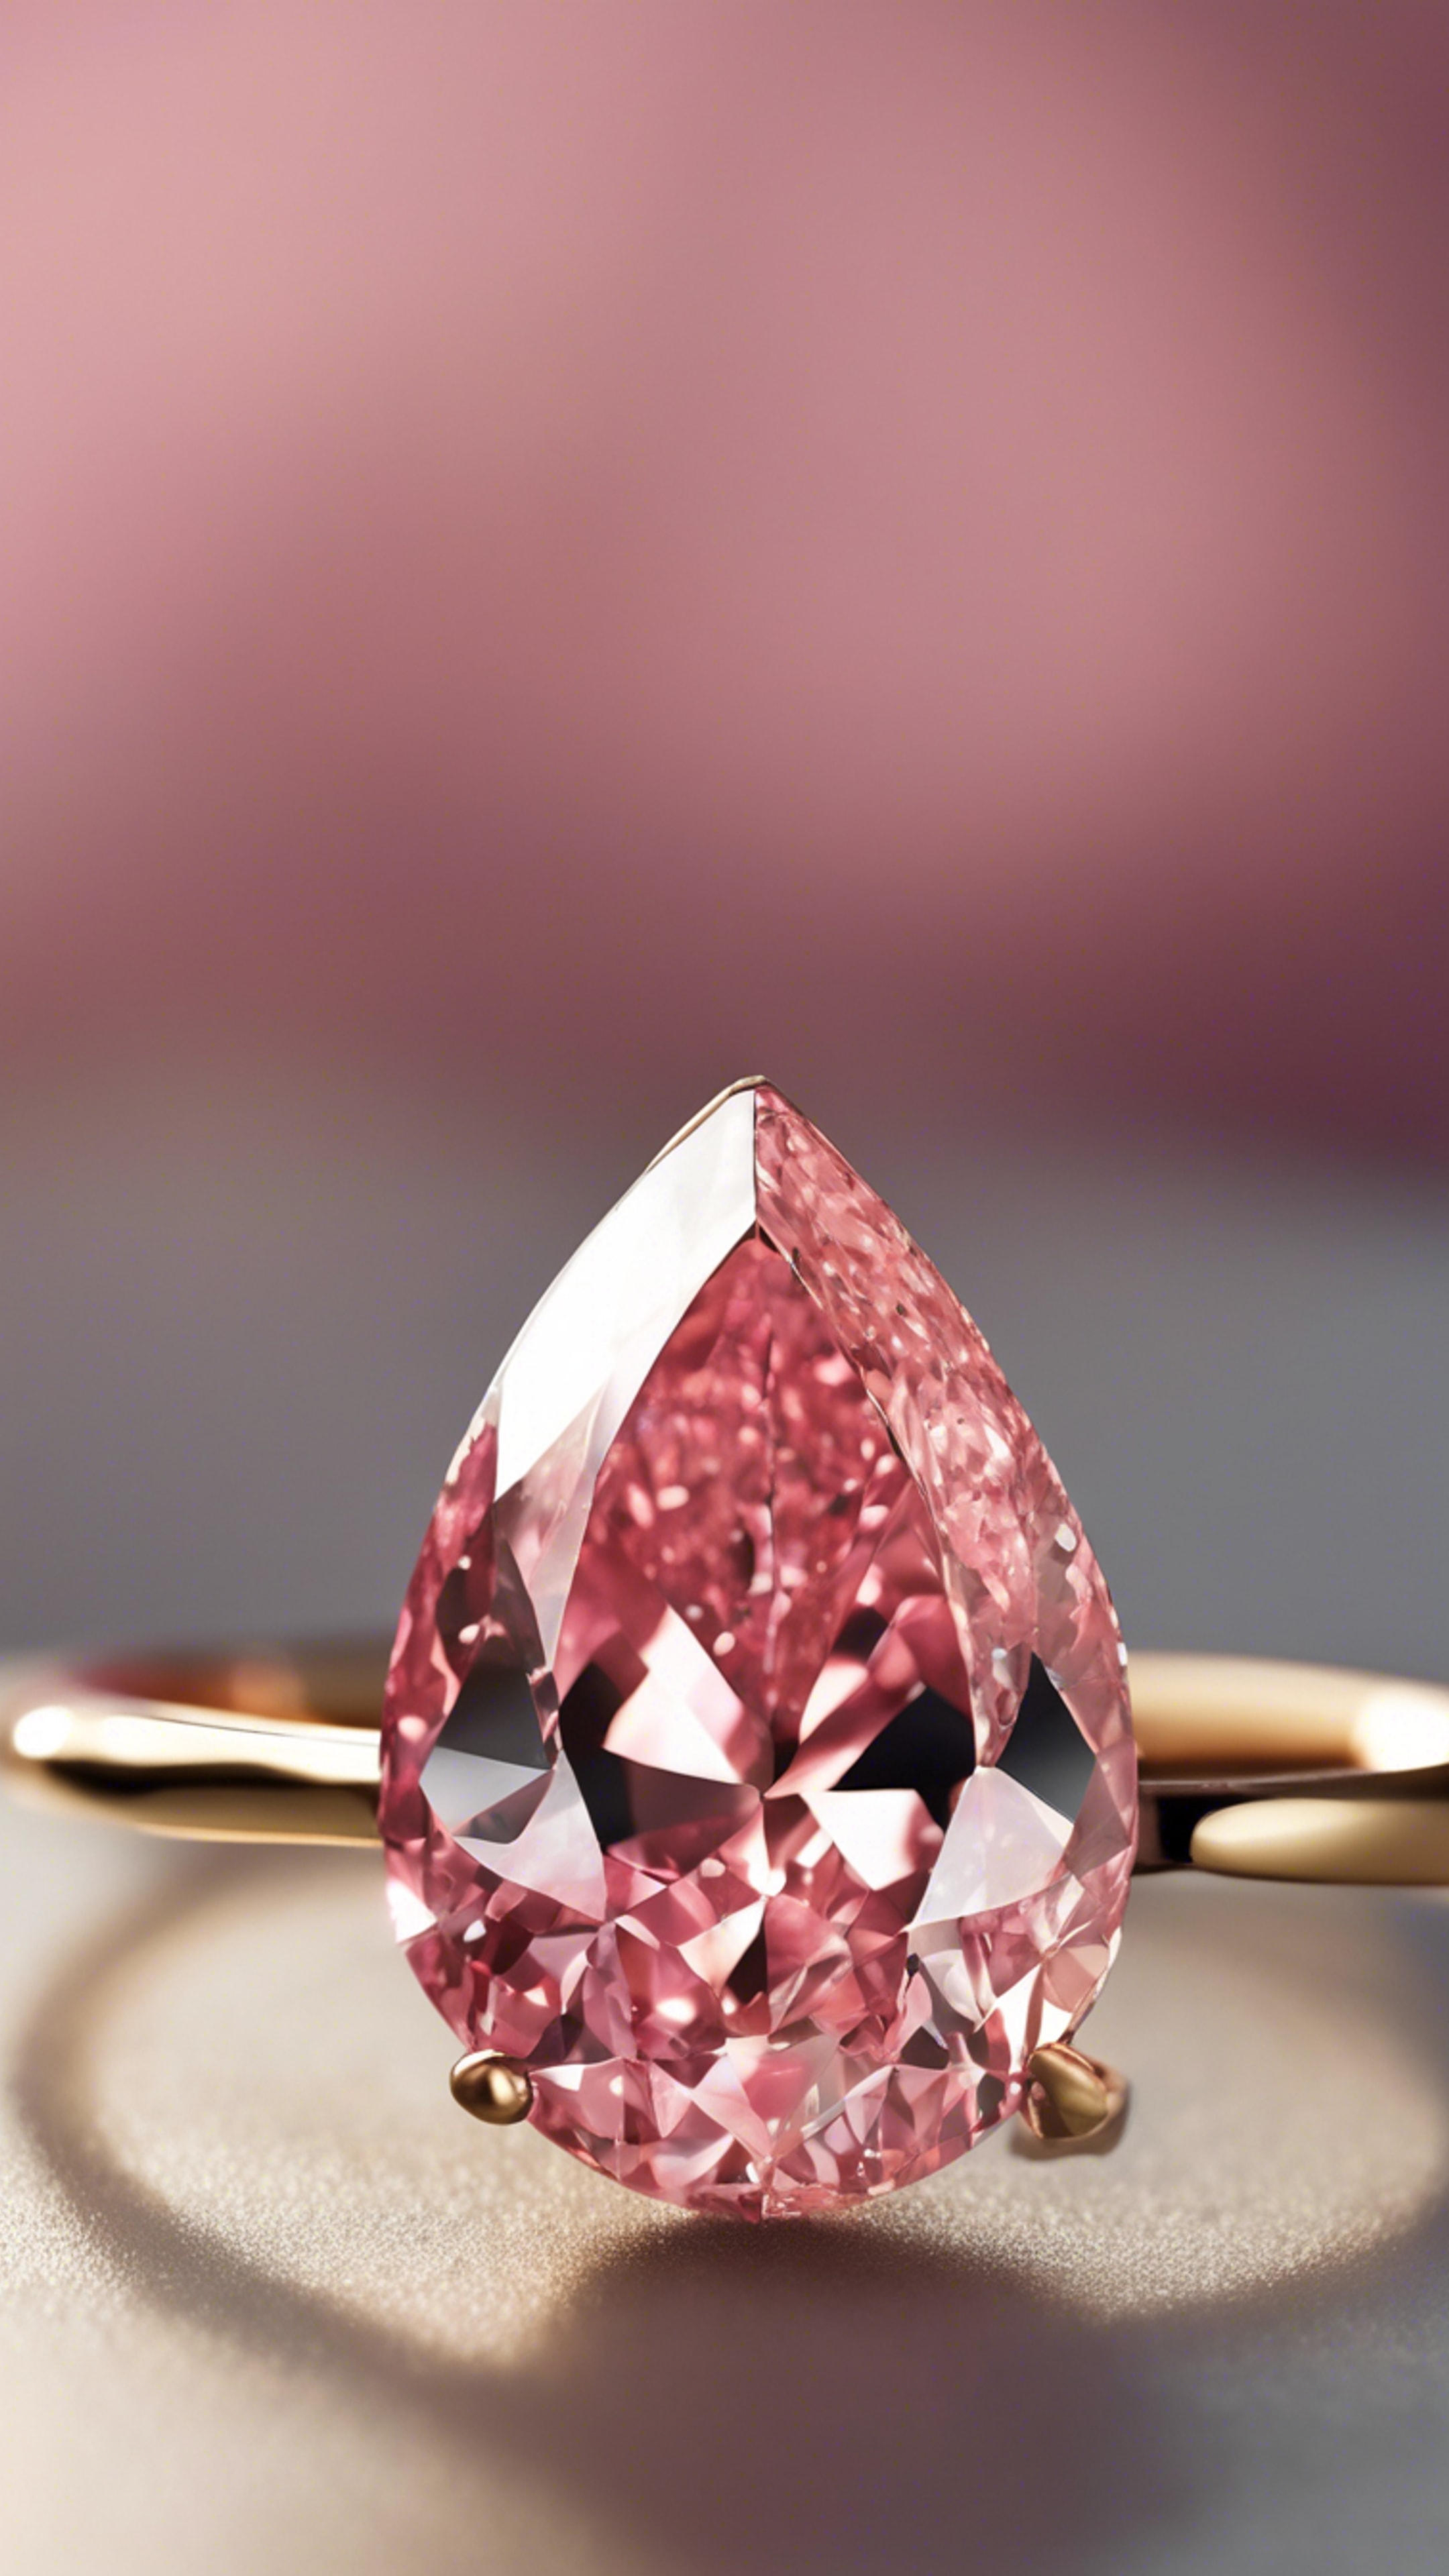 A close-up of a pink pear-shaped diamond on a simple gold band. Валлпапер[930f75676b4b4a58983f]